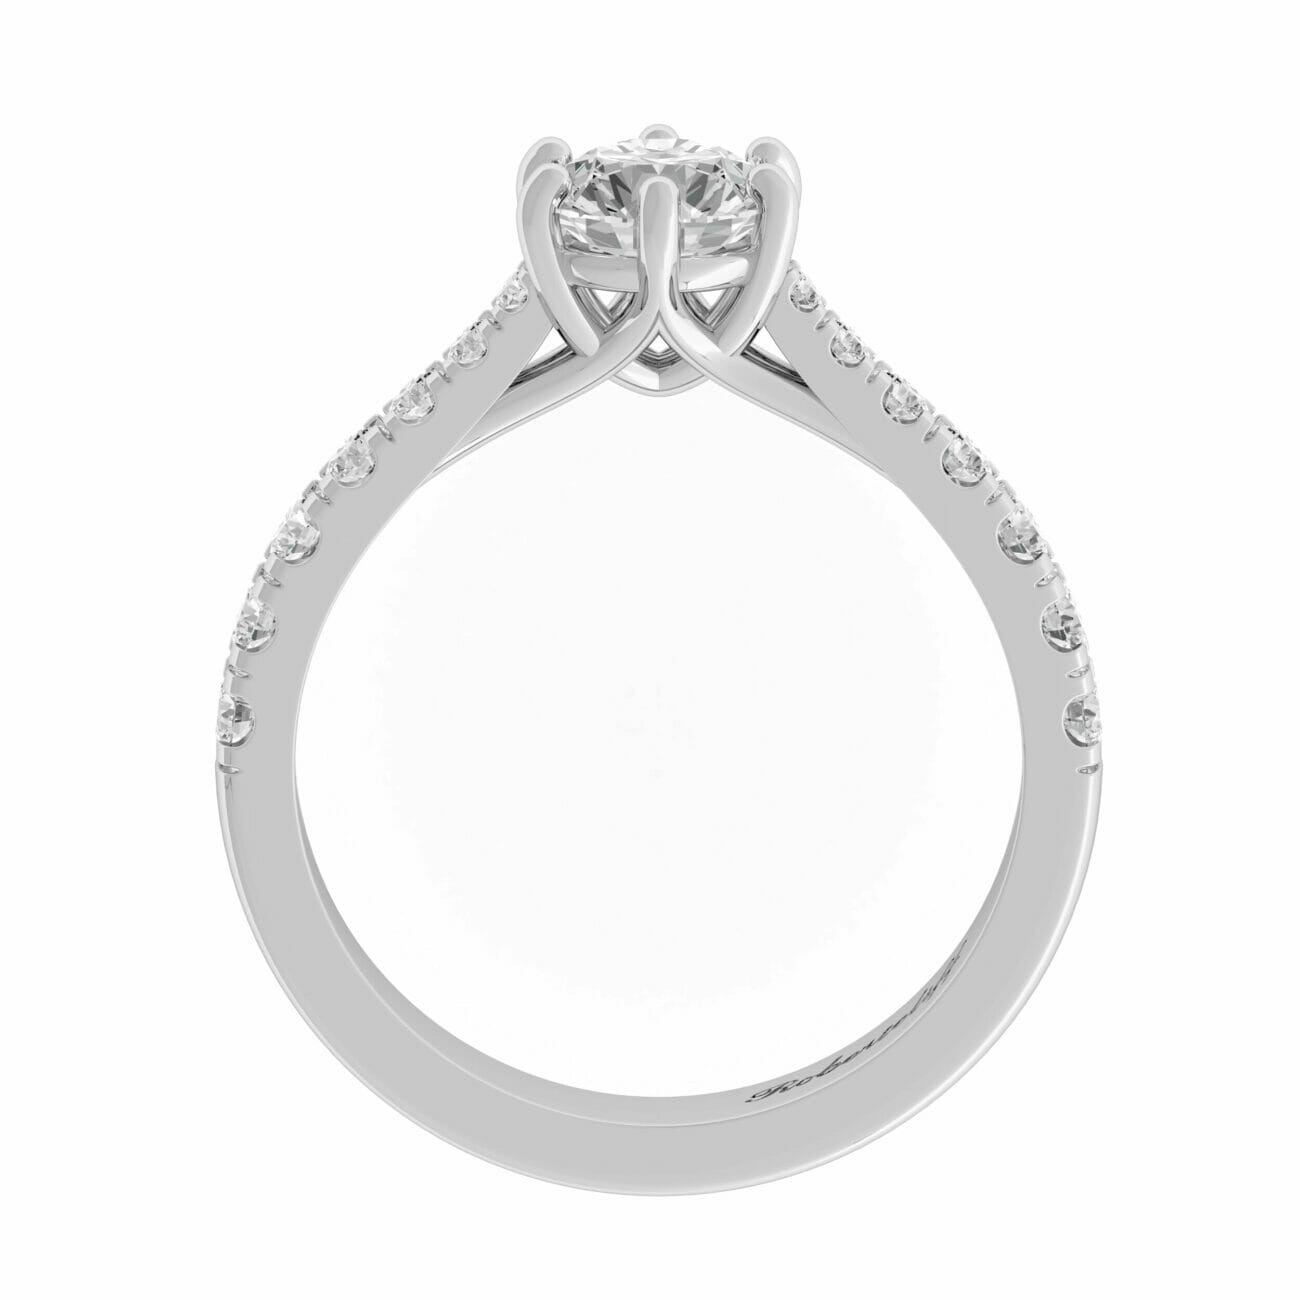 Six claw engagement ring